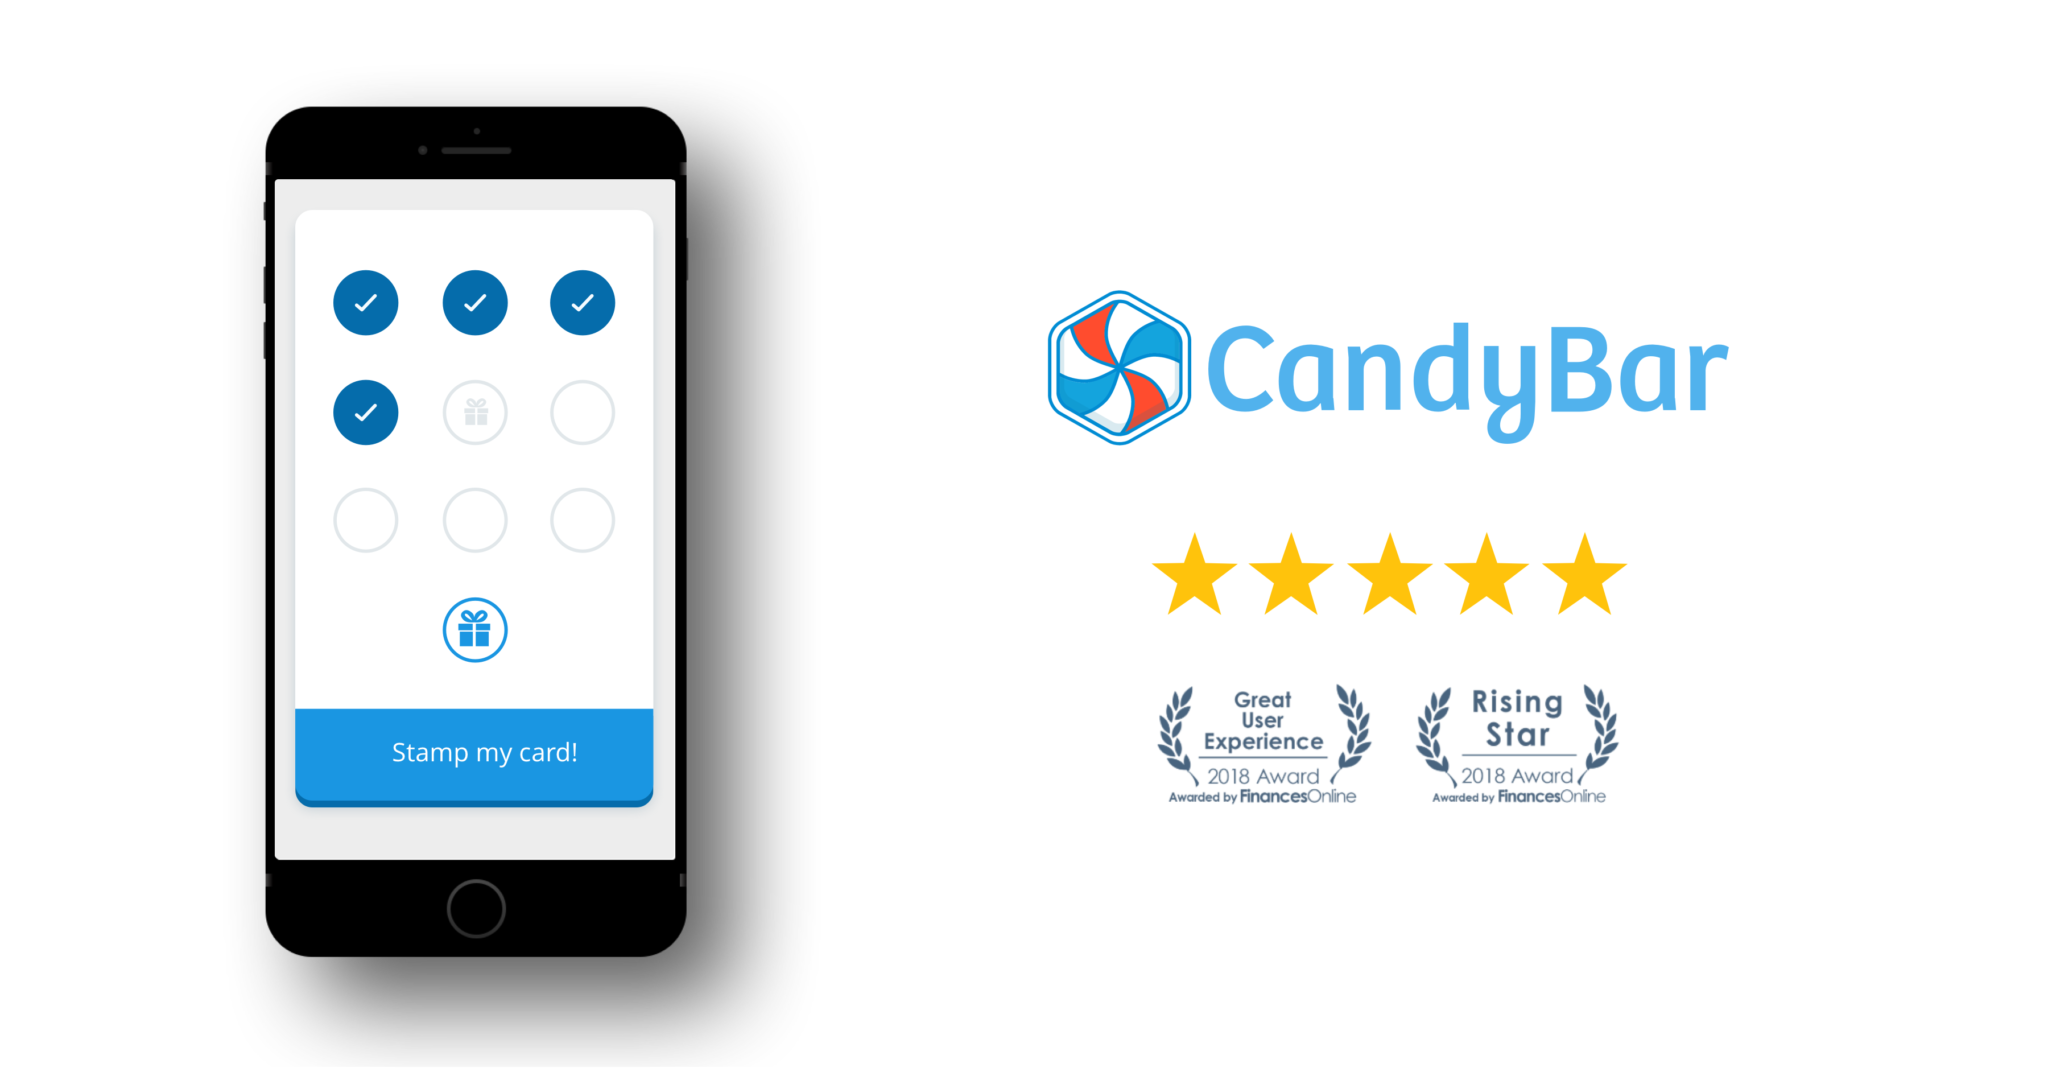 candybar awarded user satisfaction, great experience